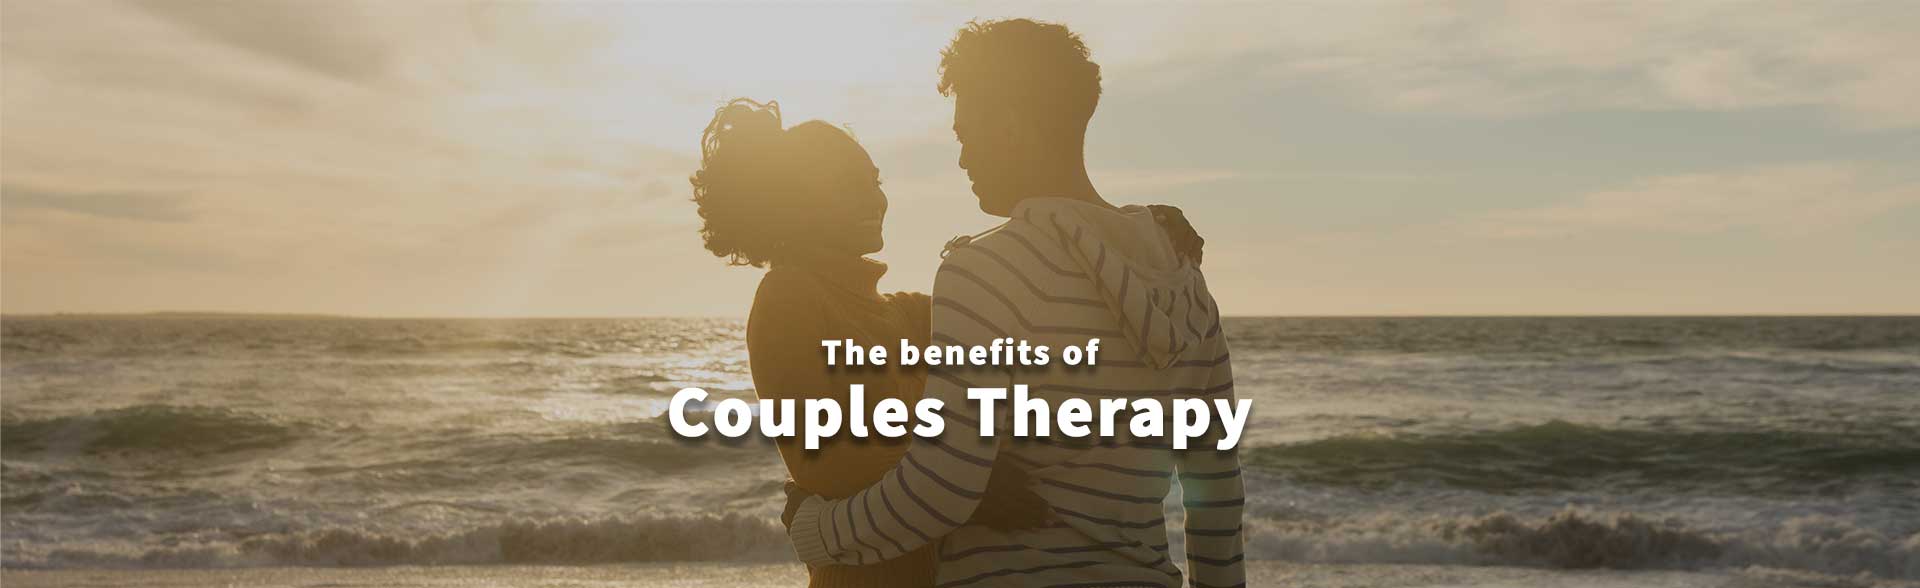 ccs-couples-therapy